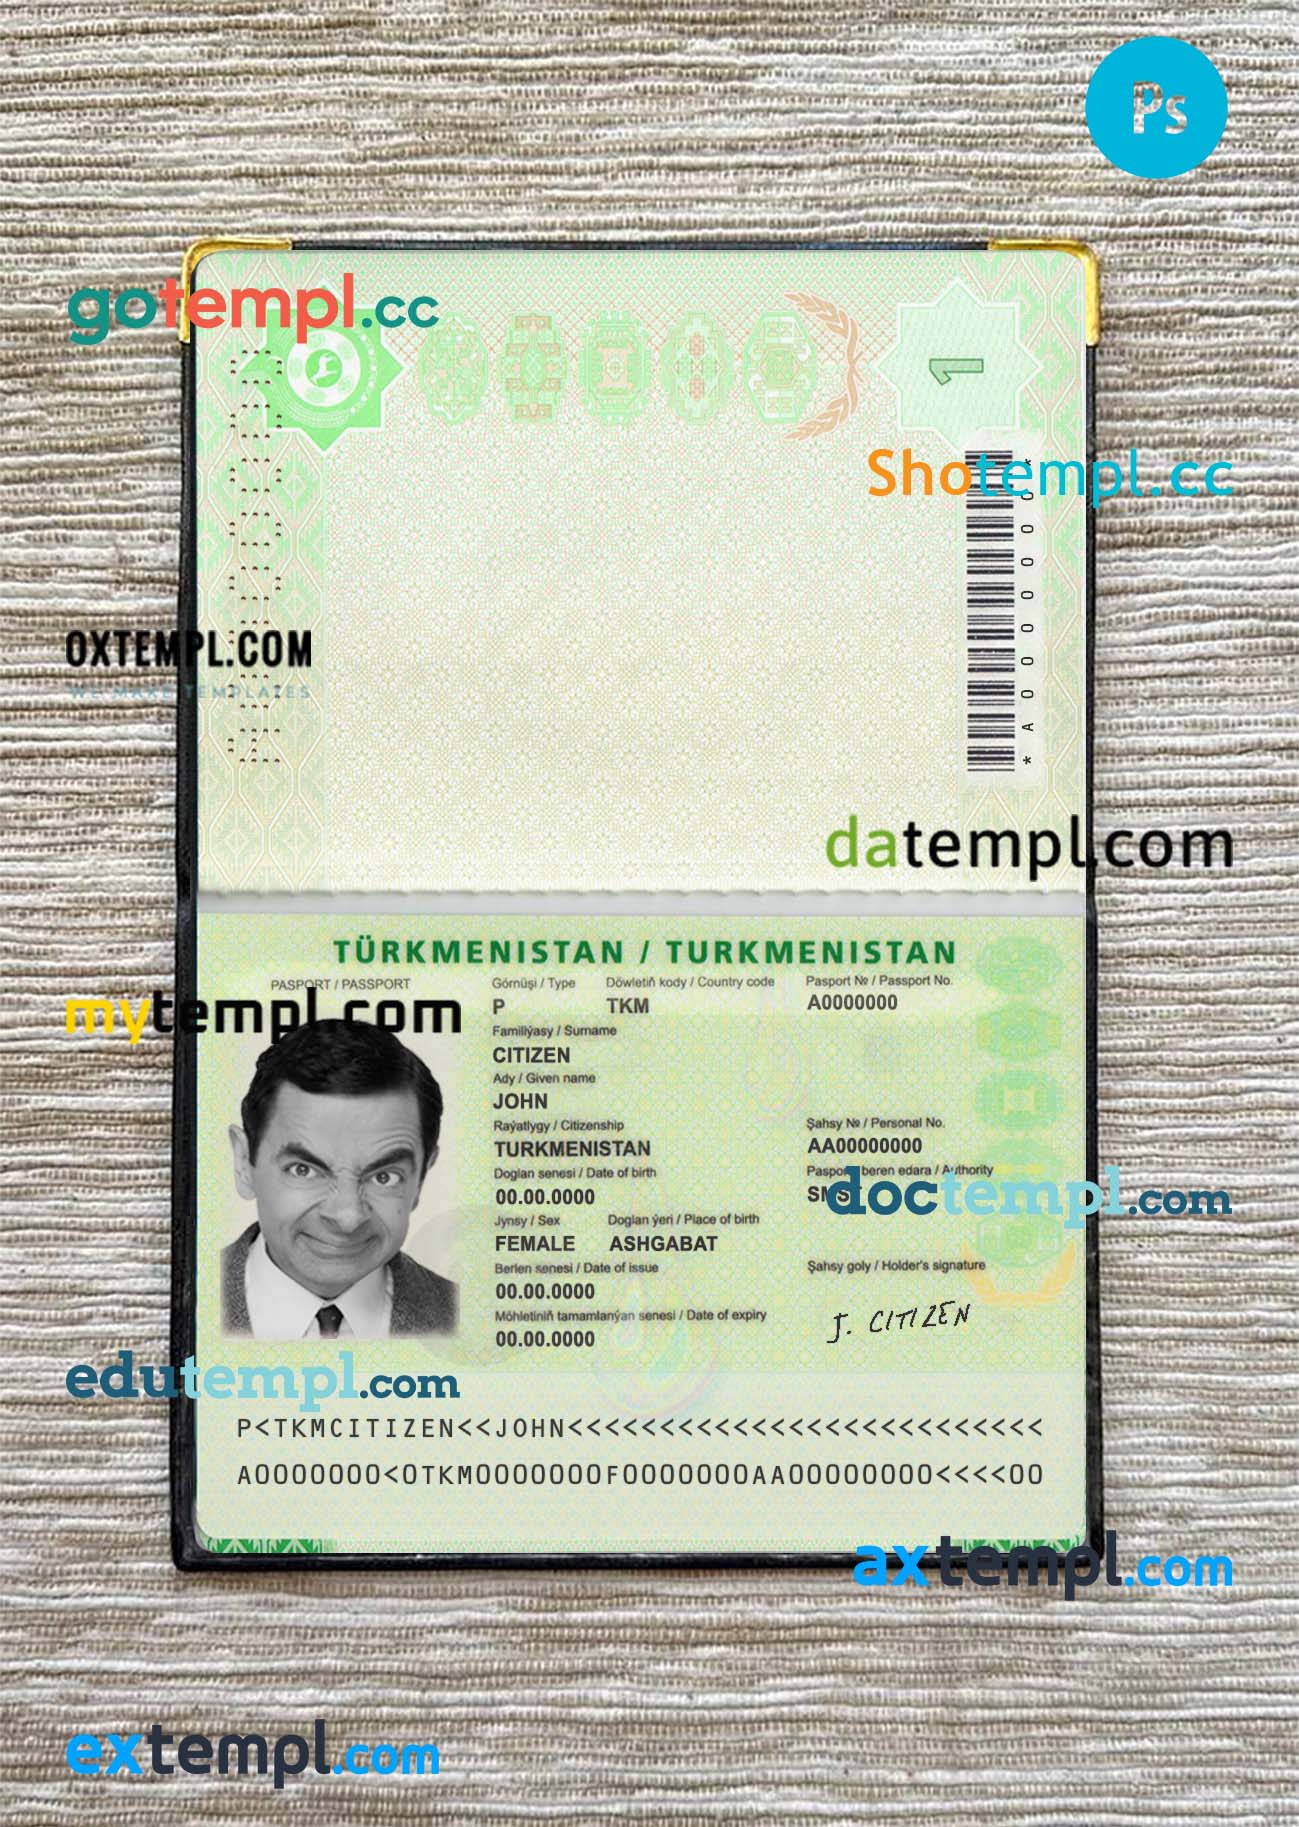 USA District of Columbia driving license PSD files, scan look and photographed image, 2 in 1